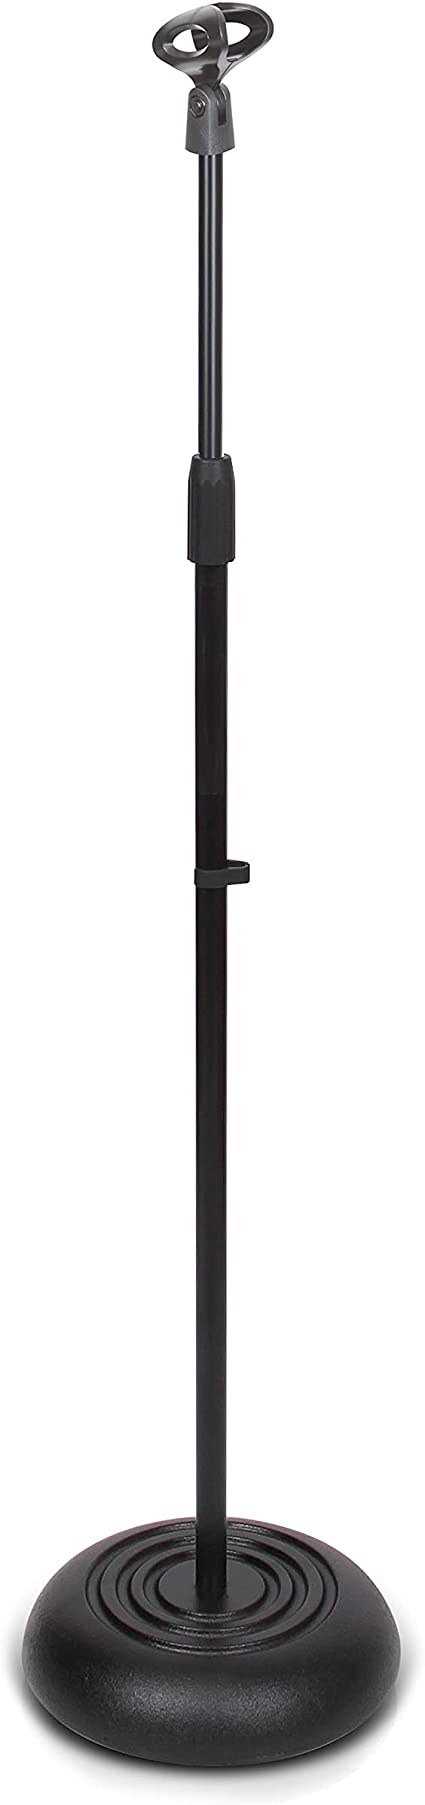 Microphone Stand - Universal Mic Mount with Heavy Compact Base, Height Adjustable (2.8’ - 5’ ft.)- PMKS5